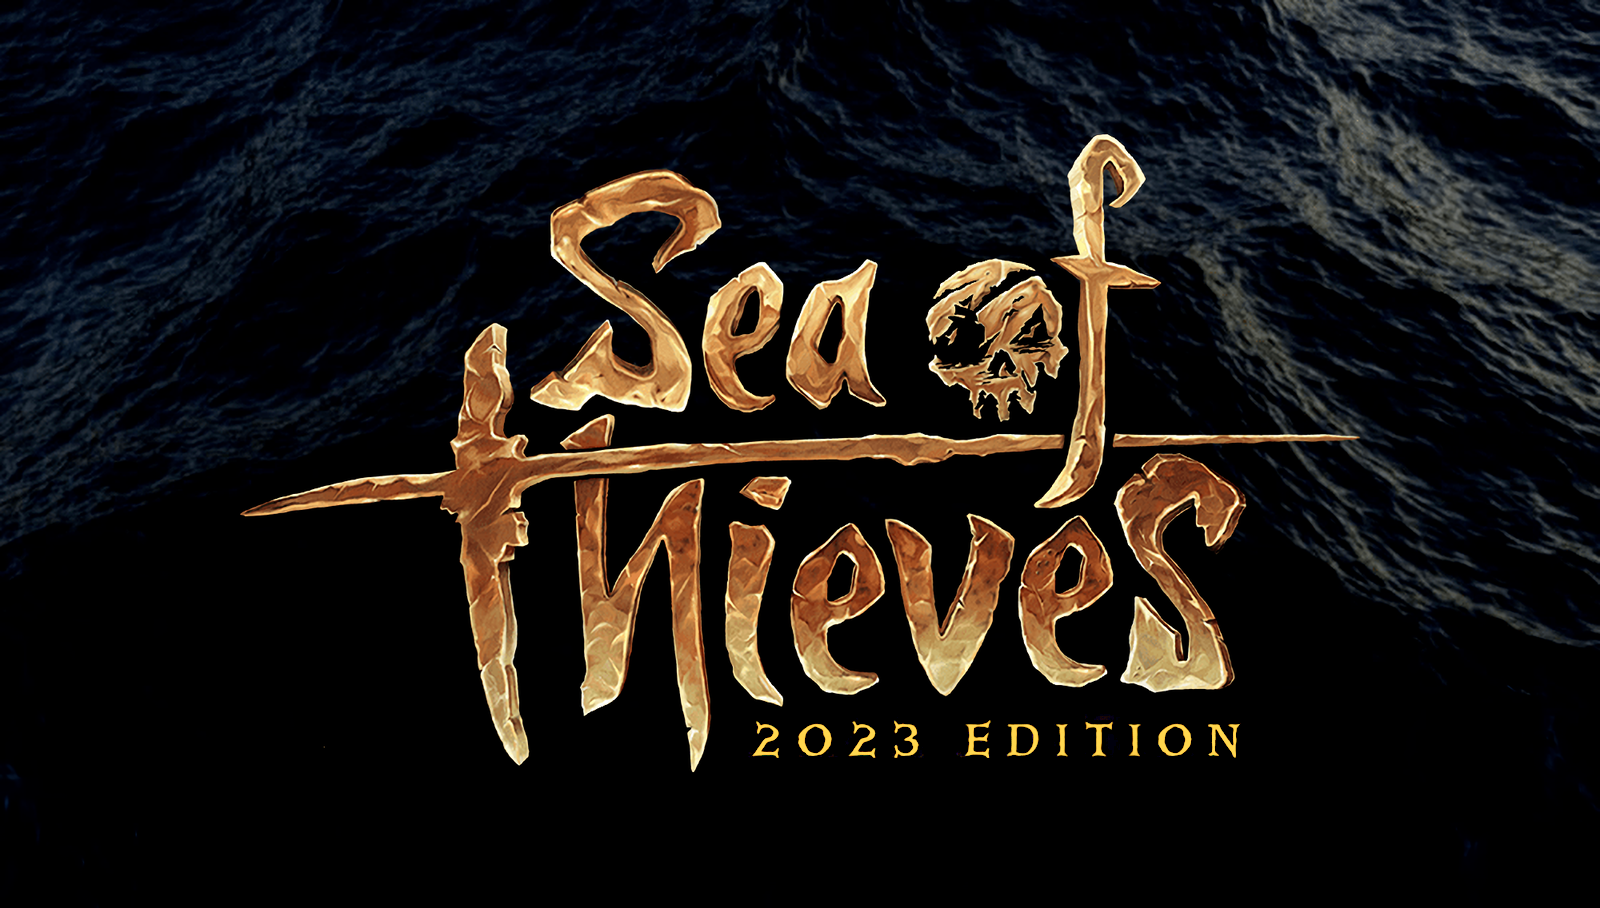 how to play sea of thieves 2023 edition on mac